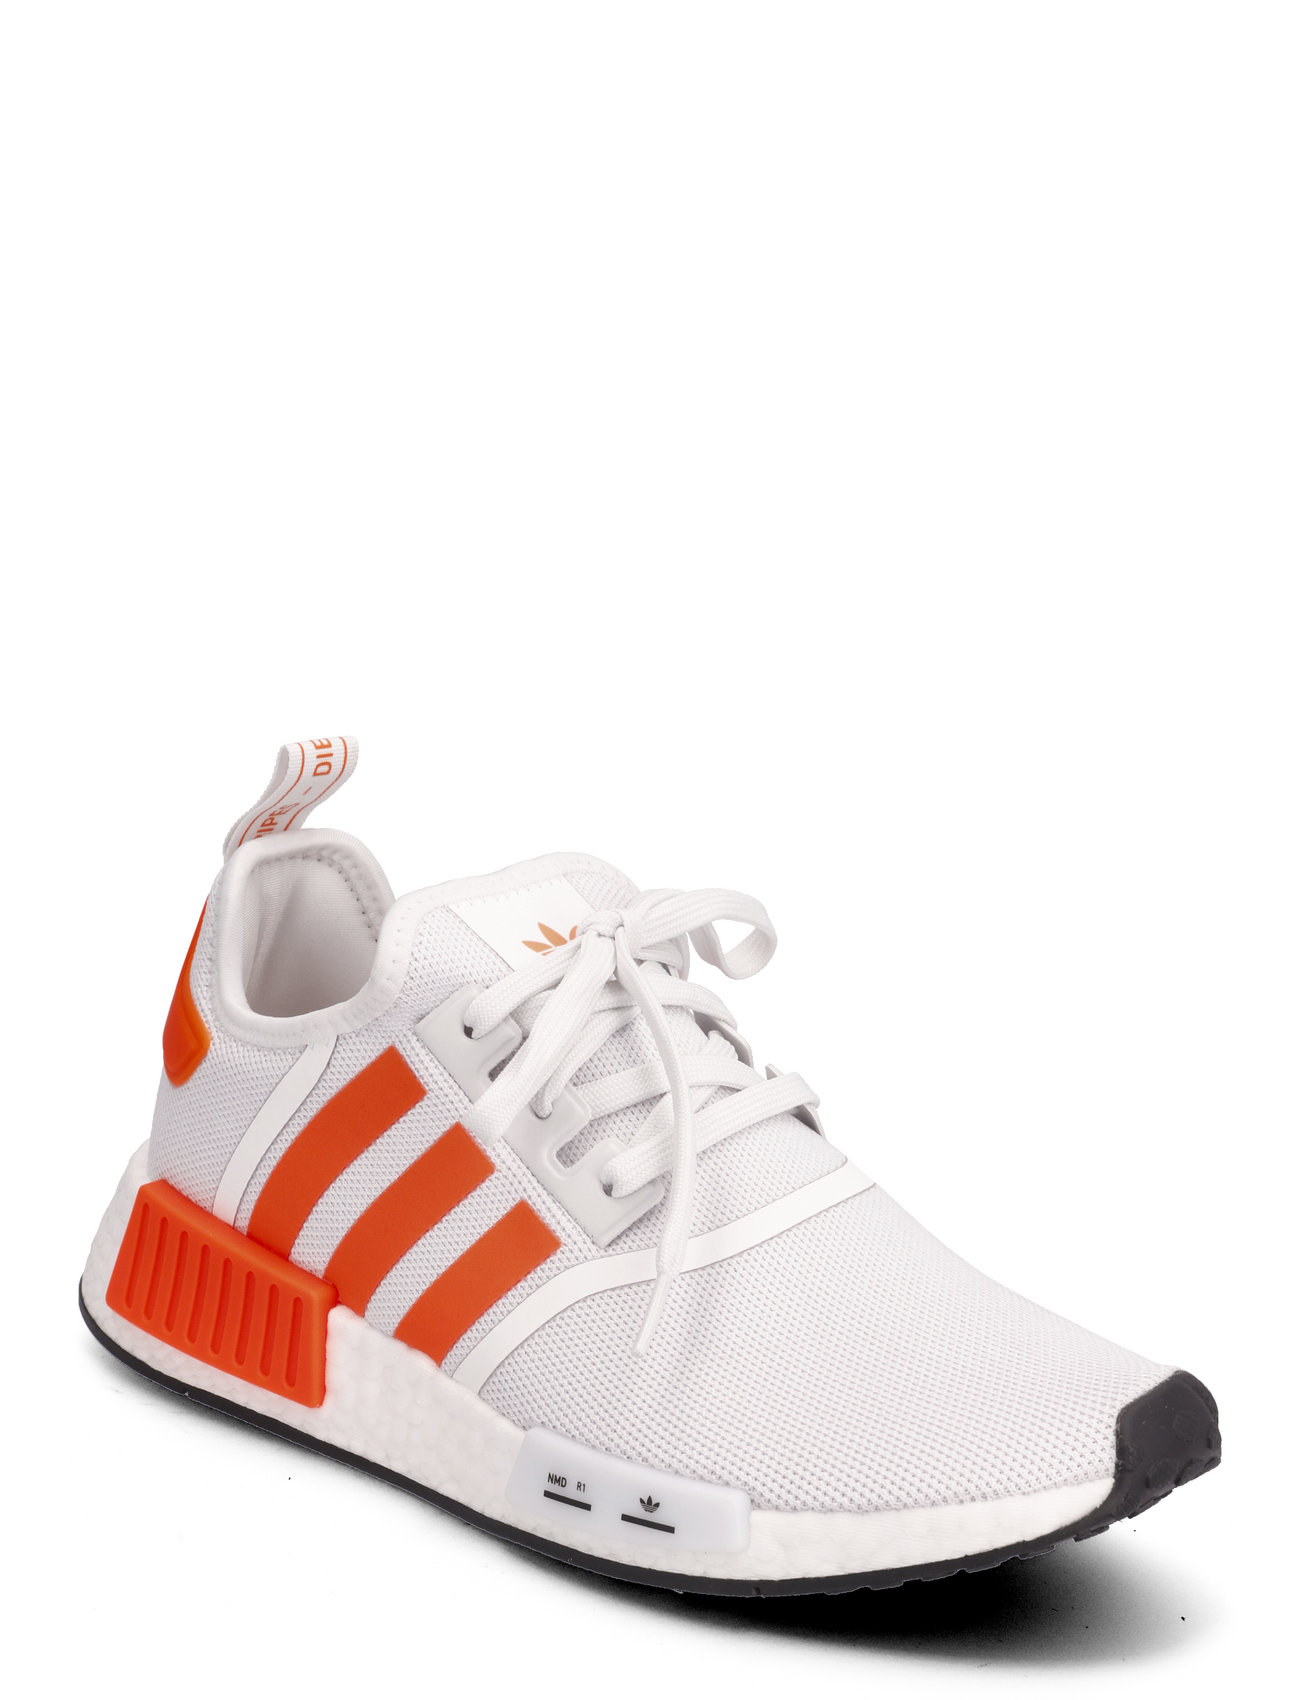 perforere forestille indtil nu adidas Originals Nmd_r1 Shoes - Lave sneakers | Boozt.com